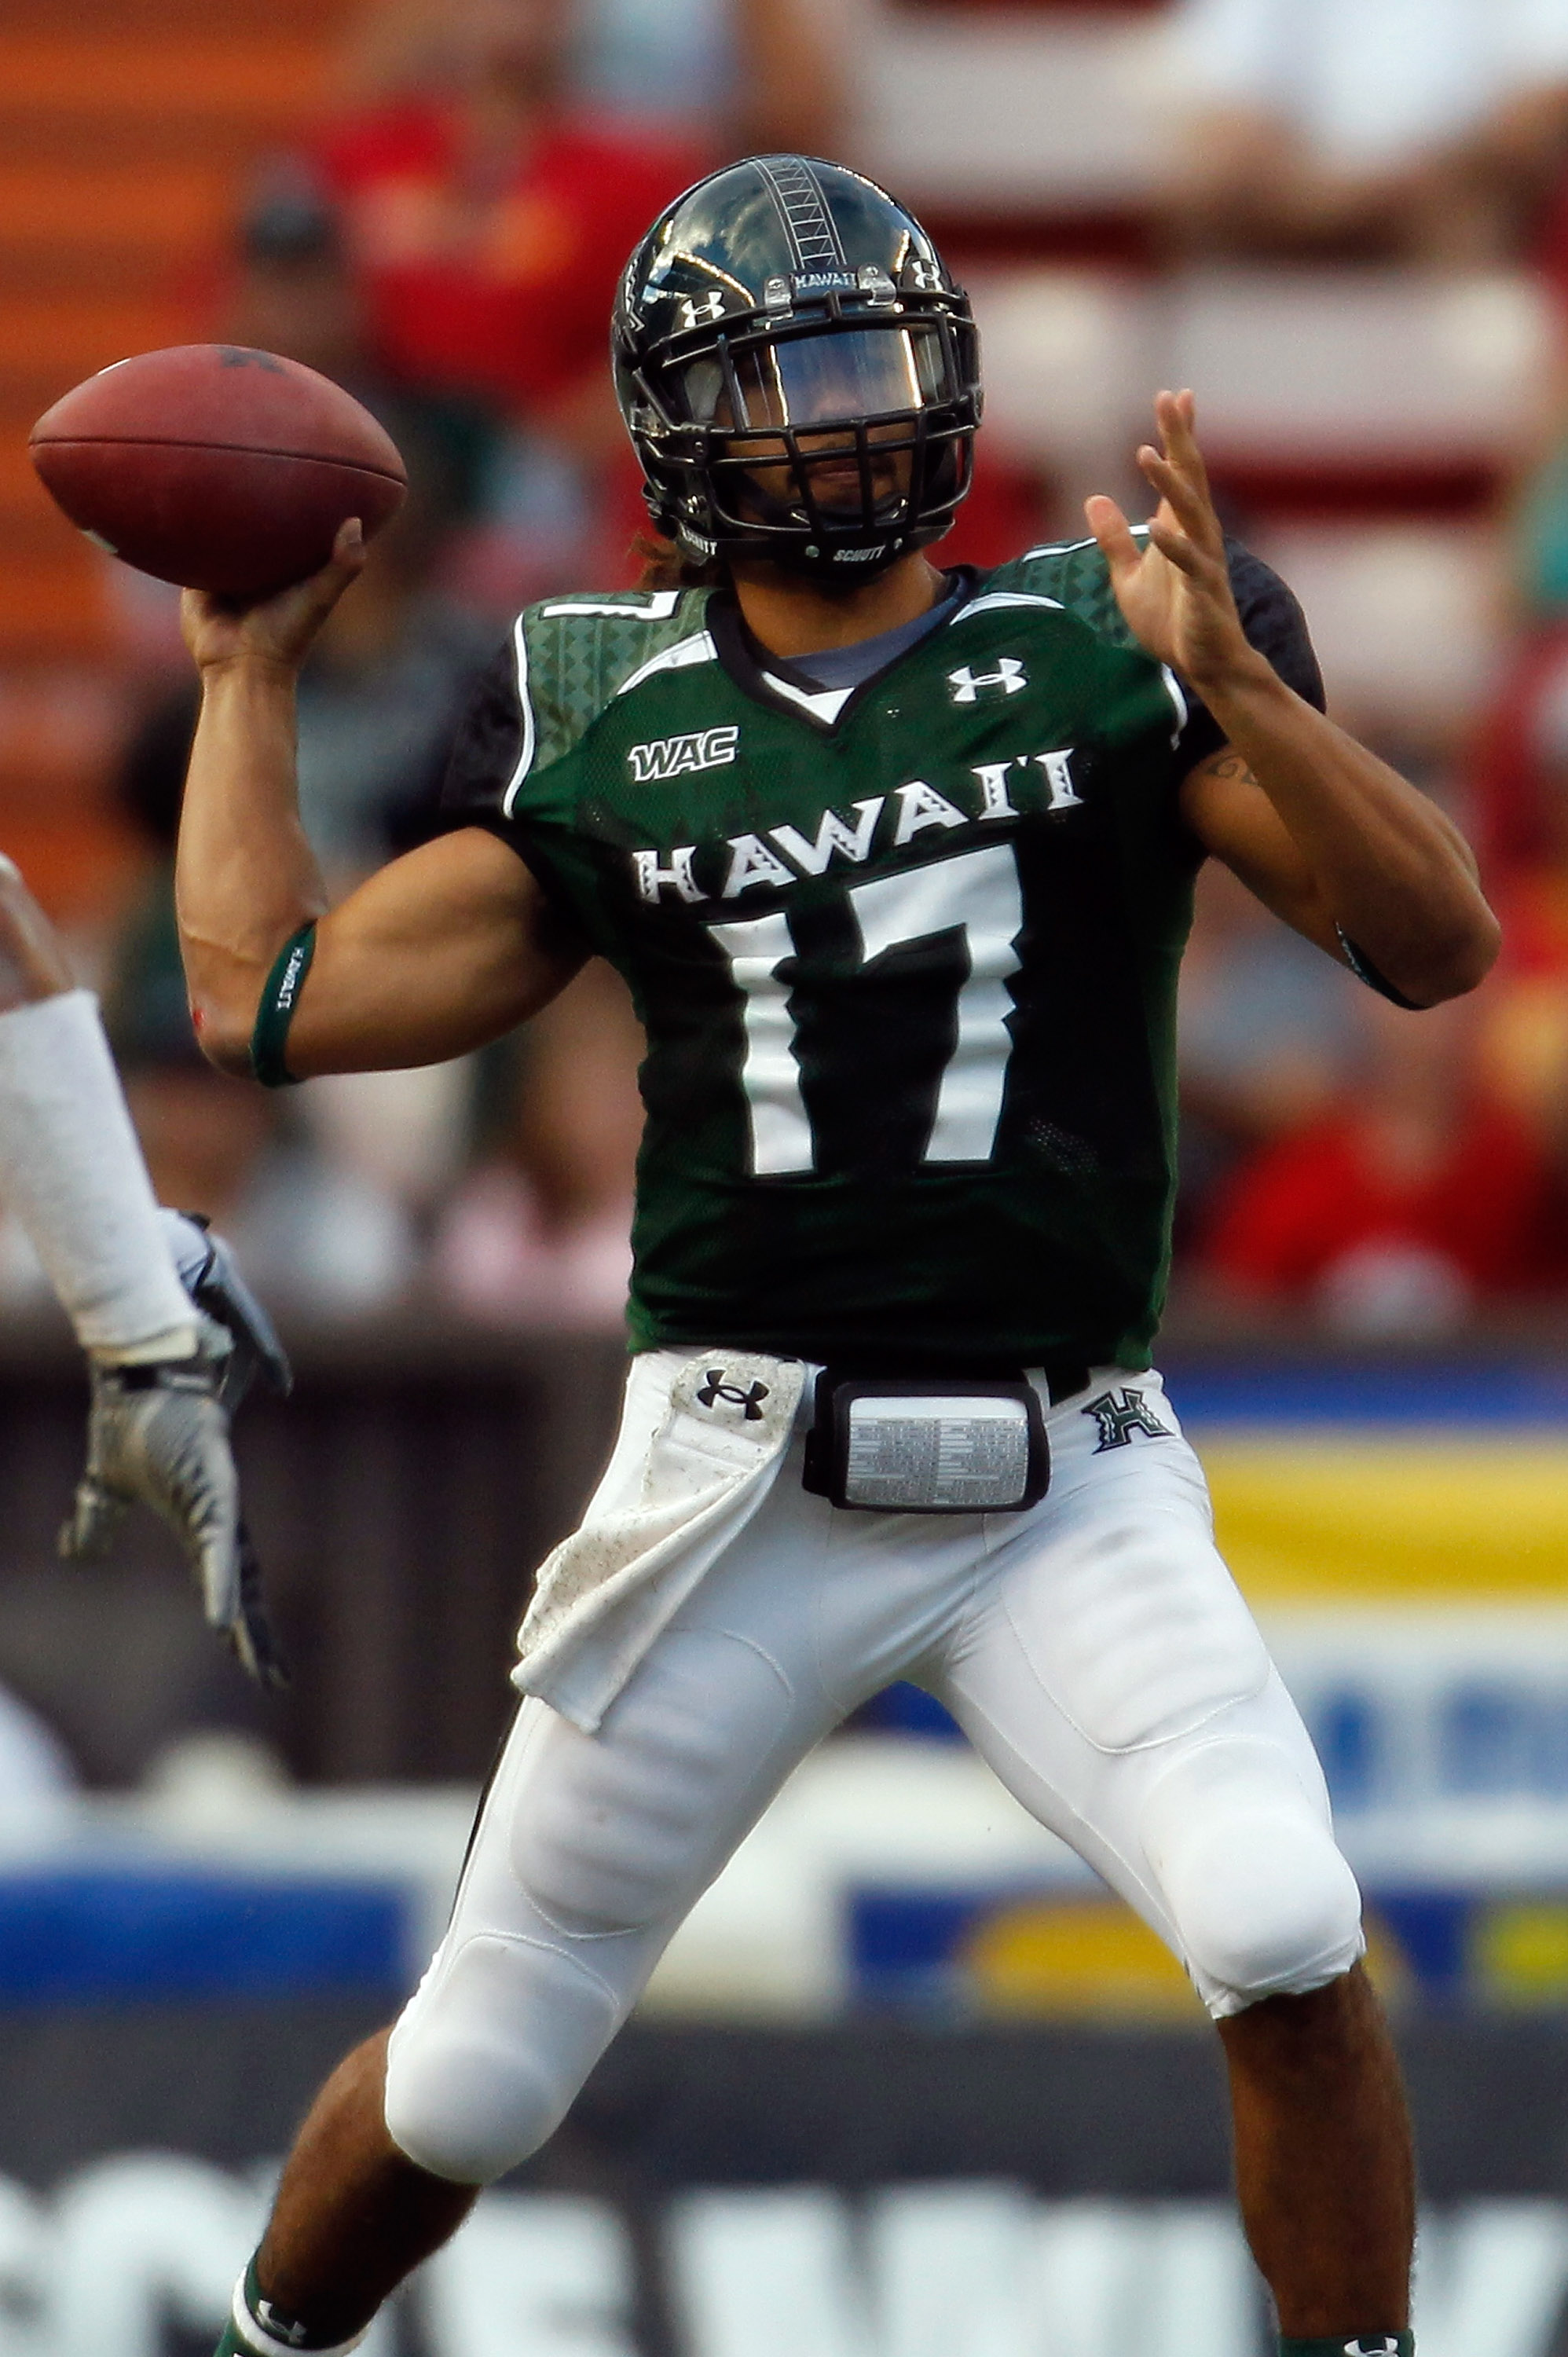 HONOLULU - SEPTEMBER 2:  Quarterback Bryant Moniz #17 of the University of Hawaii Warriors makes a pass against the University of Southern California Trojans during first half action at Aloha Stadium September 2, 2010 in Honolulu, Hawaii. (Photo by Kent N